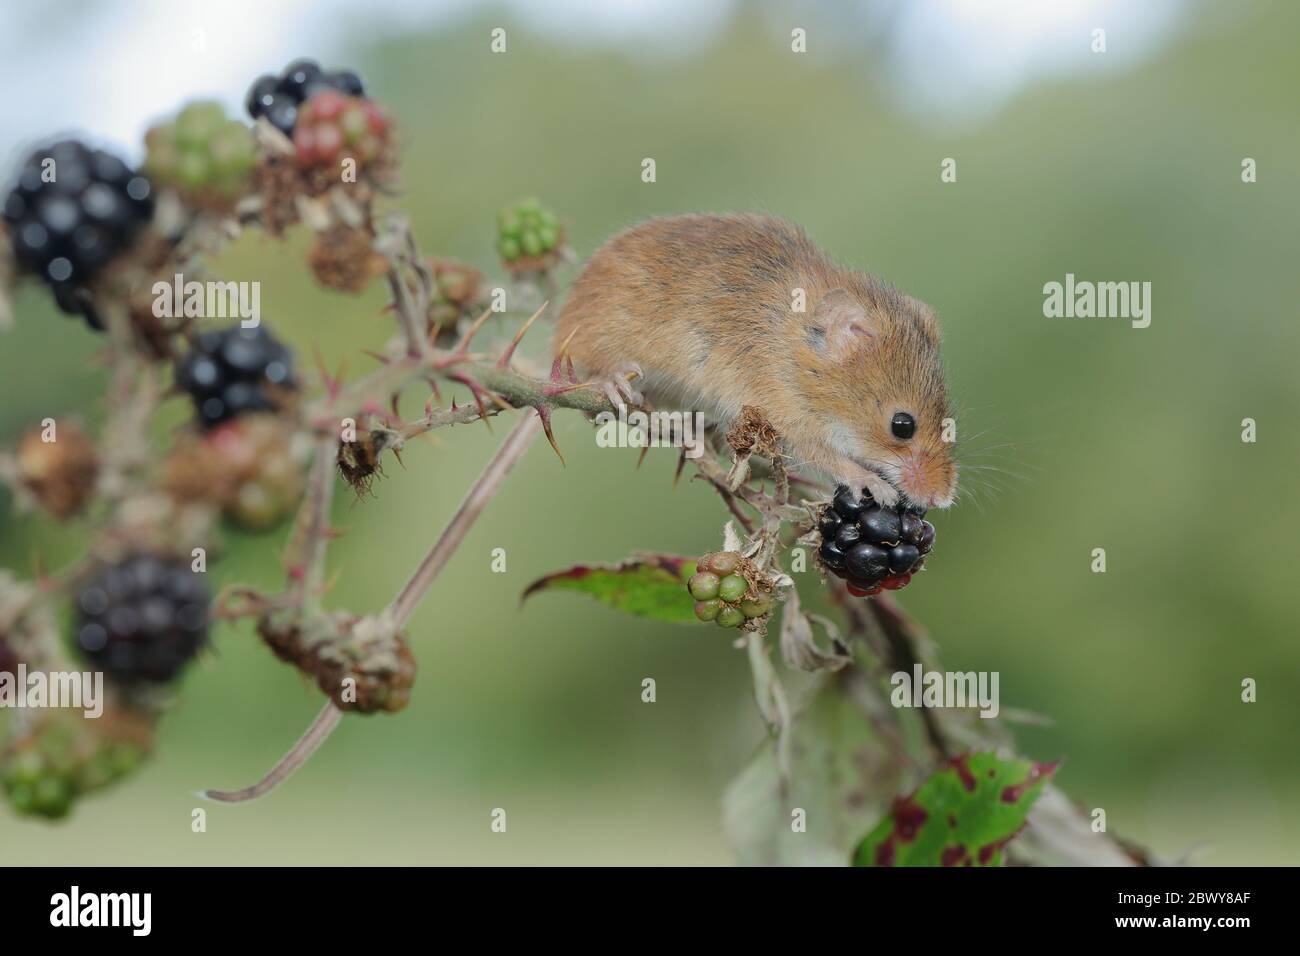 The harvest mouse is a small rodent native to Europe and Asia. It is typically found in fields of cereal crops, such as wheat and oats, in reed beds. Stock Photo